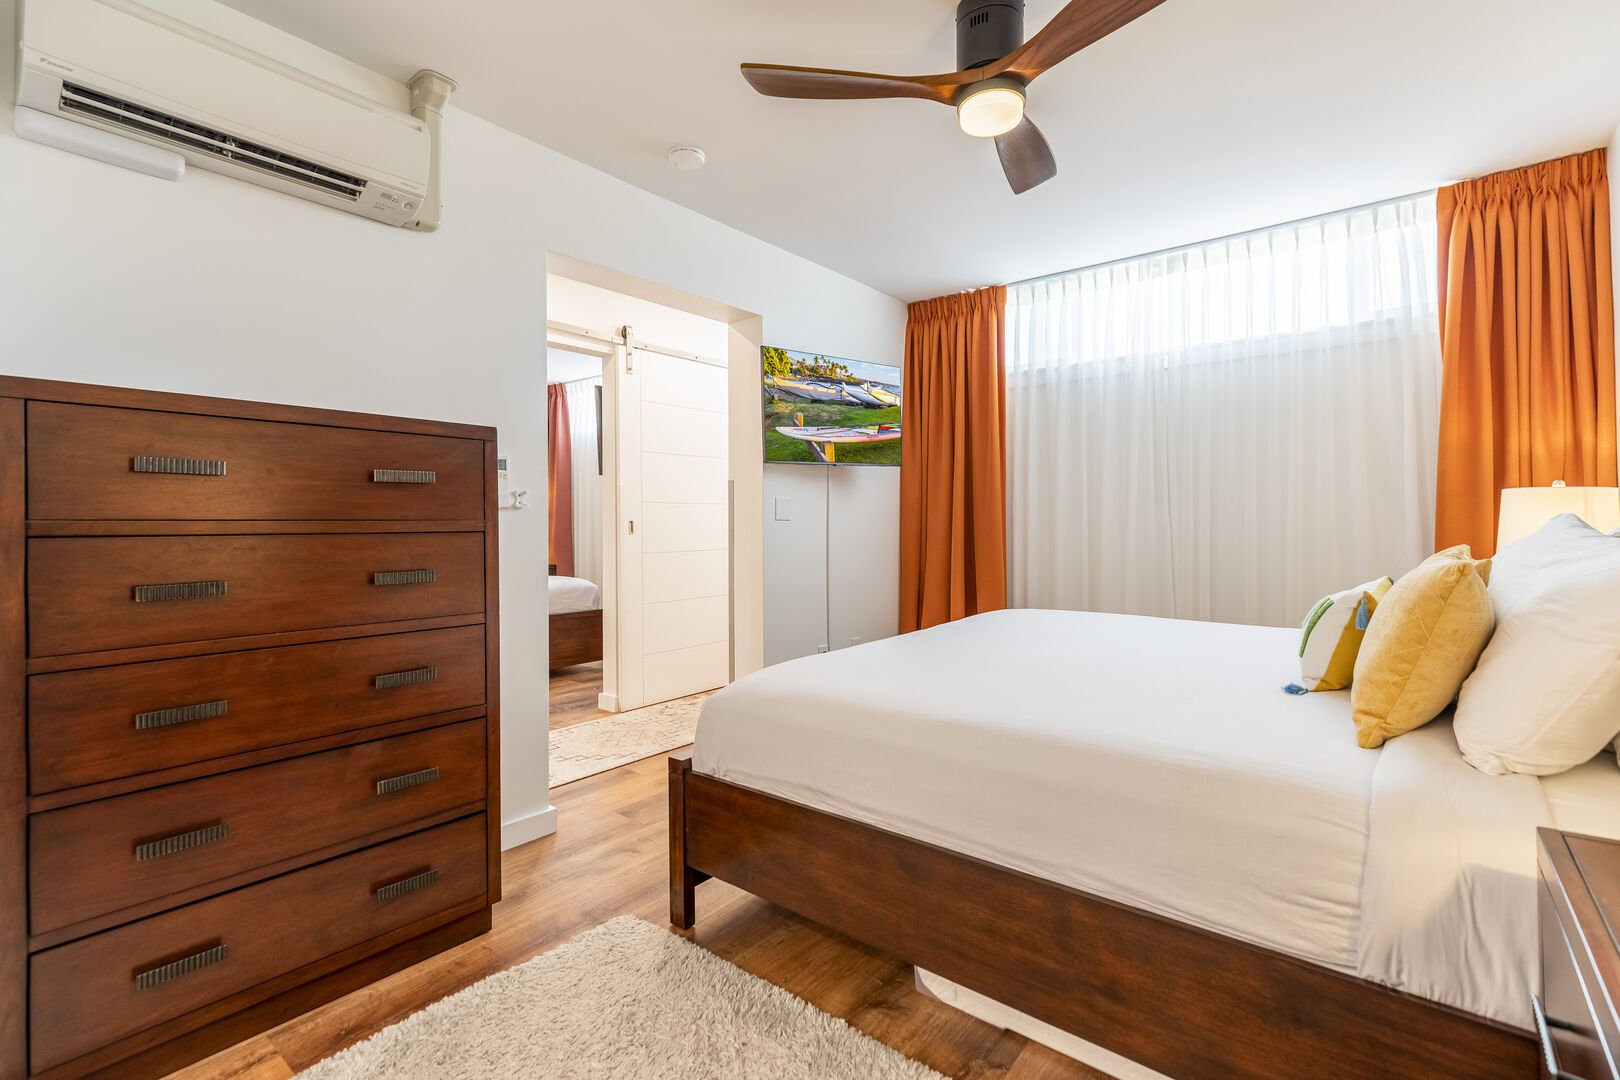 Master bedroom with split AC and ceiling fan